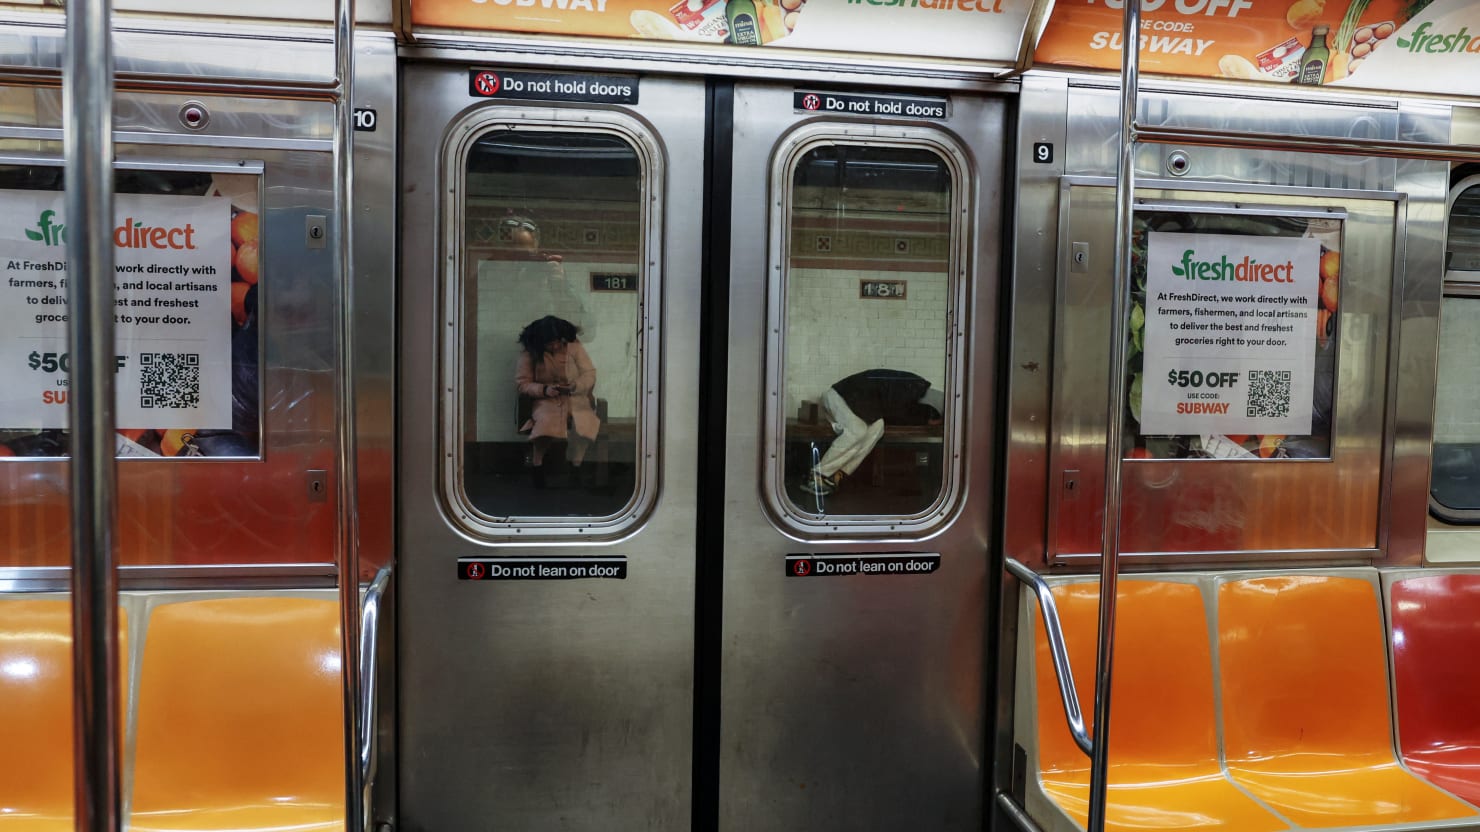 New York City Woman Loses Her Feet After Boyfriend Shoves Her in Front of Subway Train